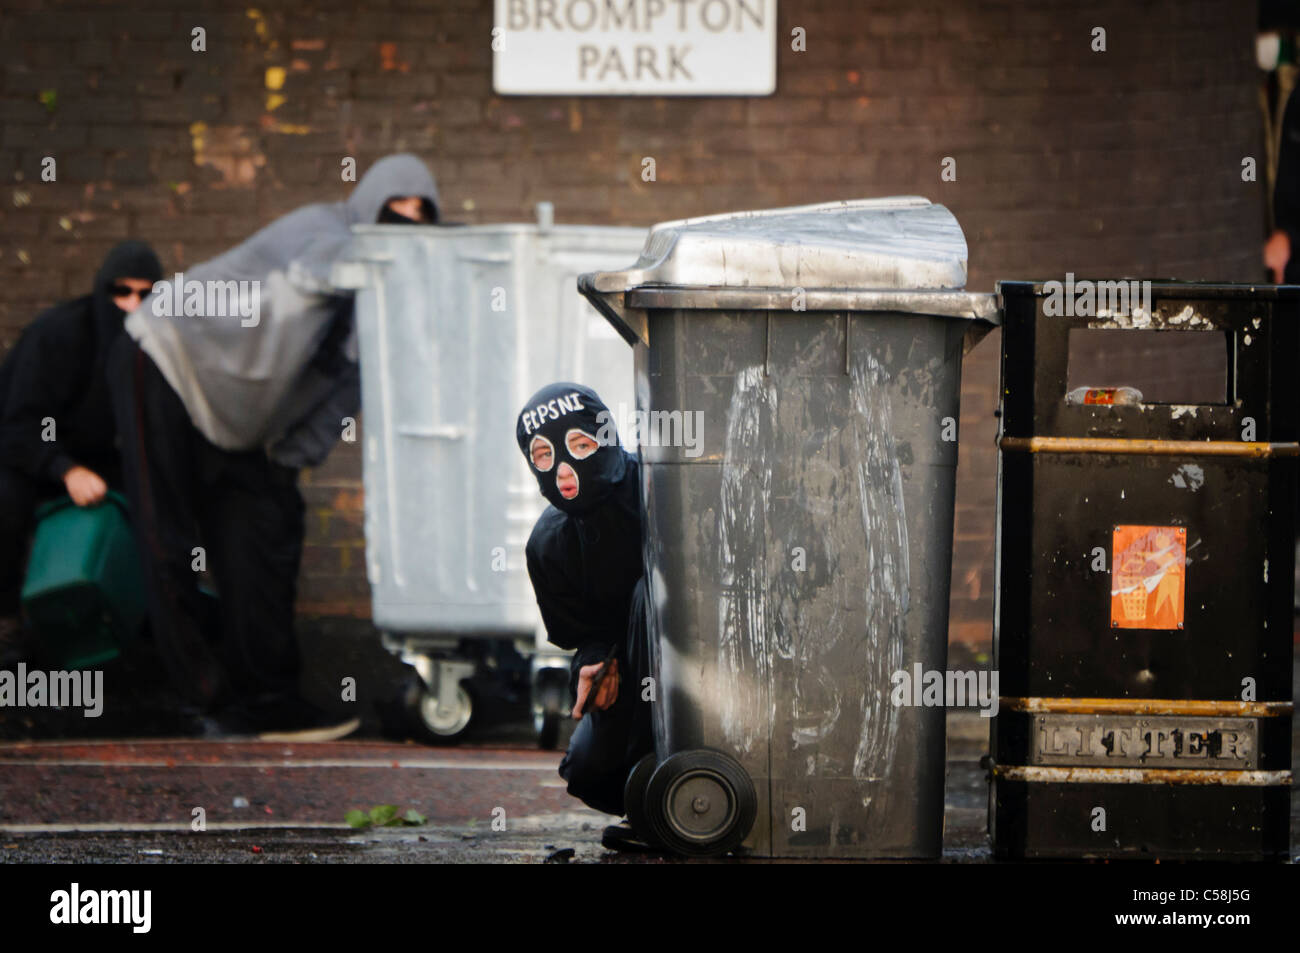 Rioter wearing balaclava with initials 'FTPSNI' hides behind a dustbin with a rock in his hand to throw at police. Two rioters behind carry a crate of petrol bombs to throw Stock Photo